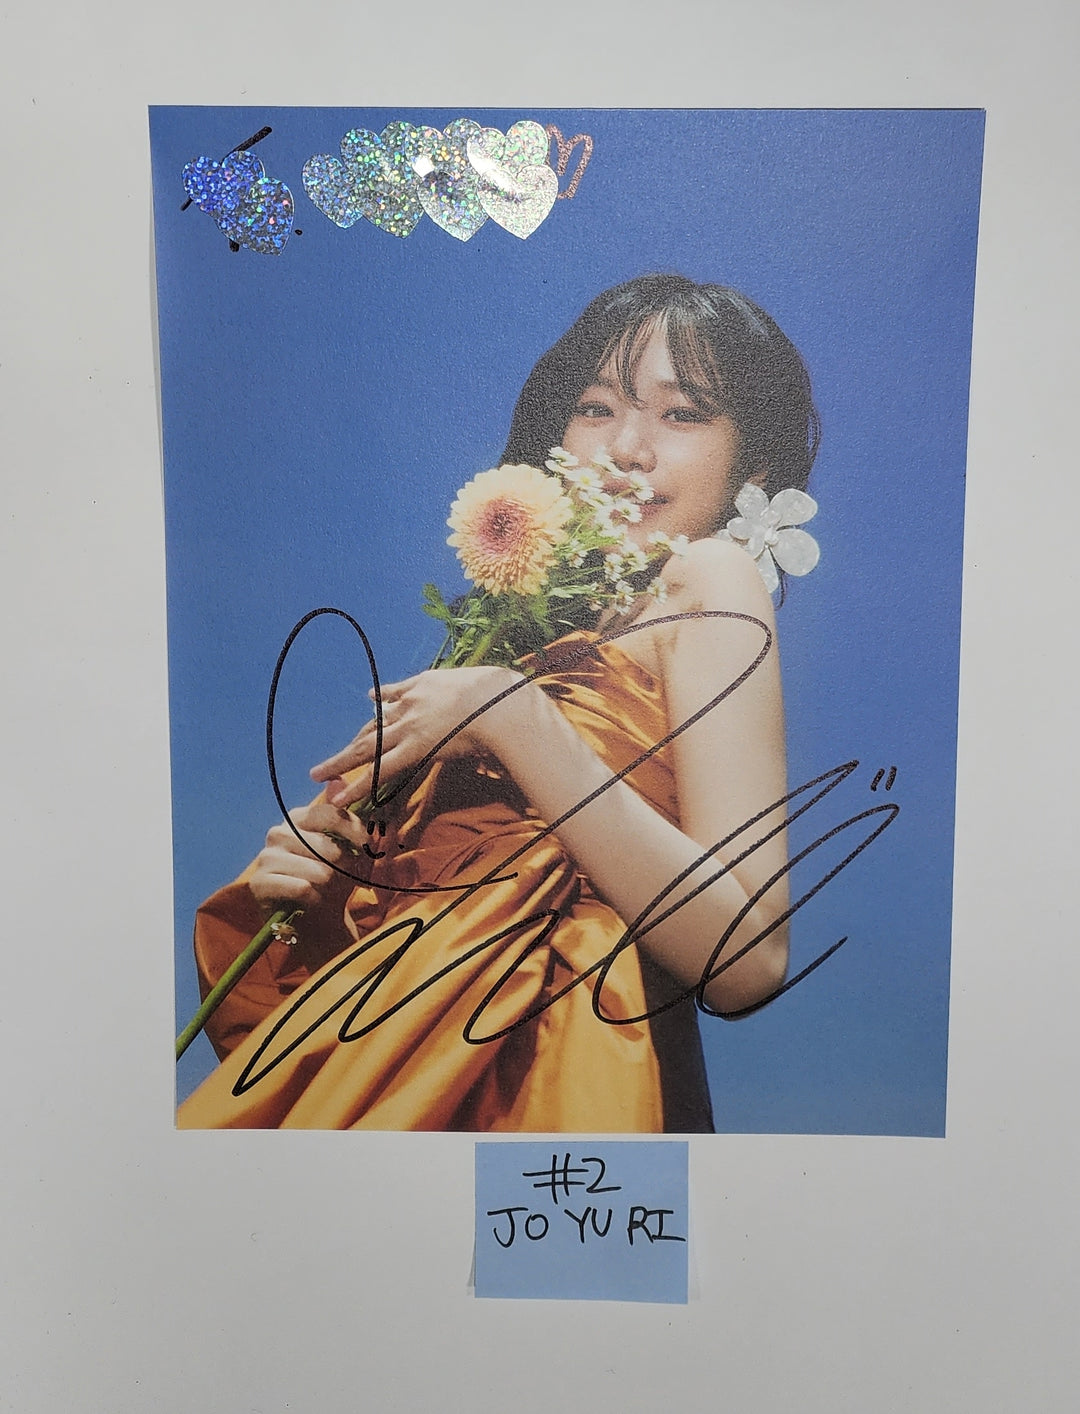 JO YURI (Of IZONE) ‘Op.22 Y-Waltz : in Major’  - A Cut Page From Fansign Event Album Photo